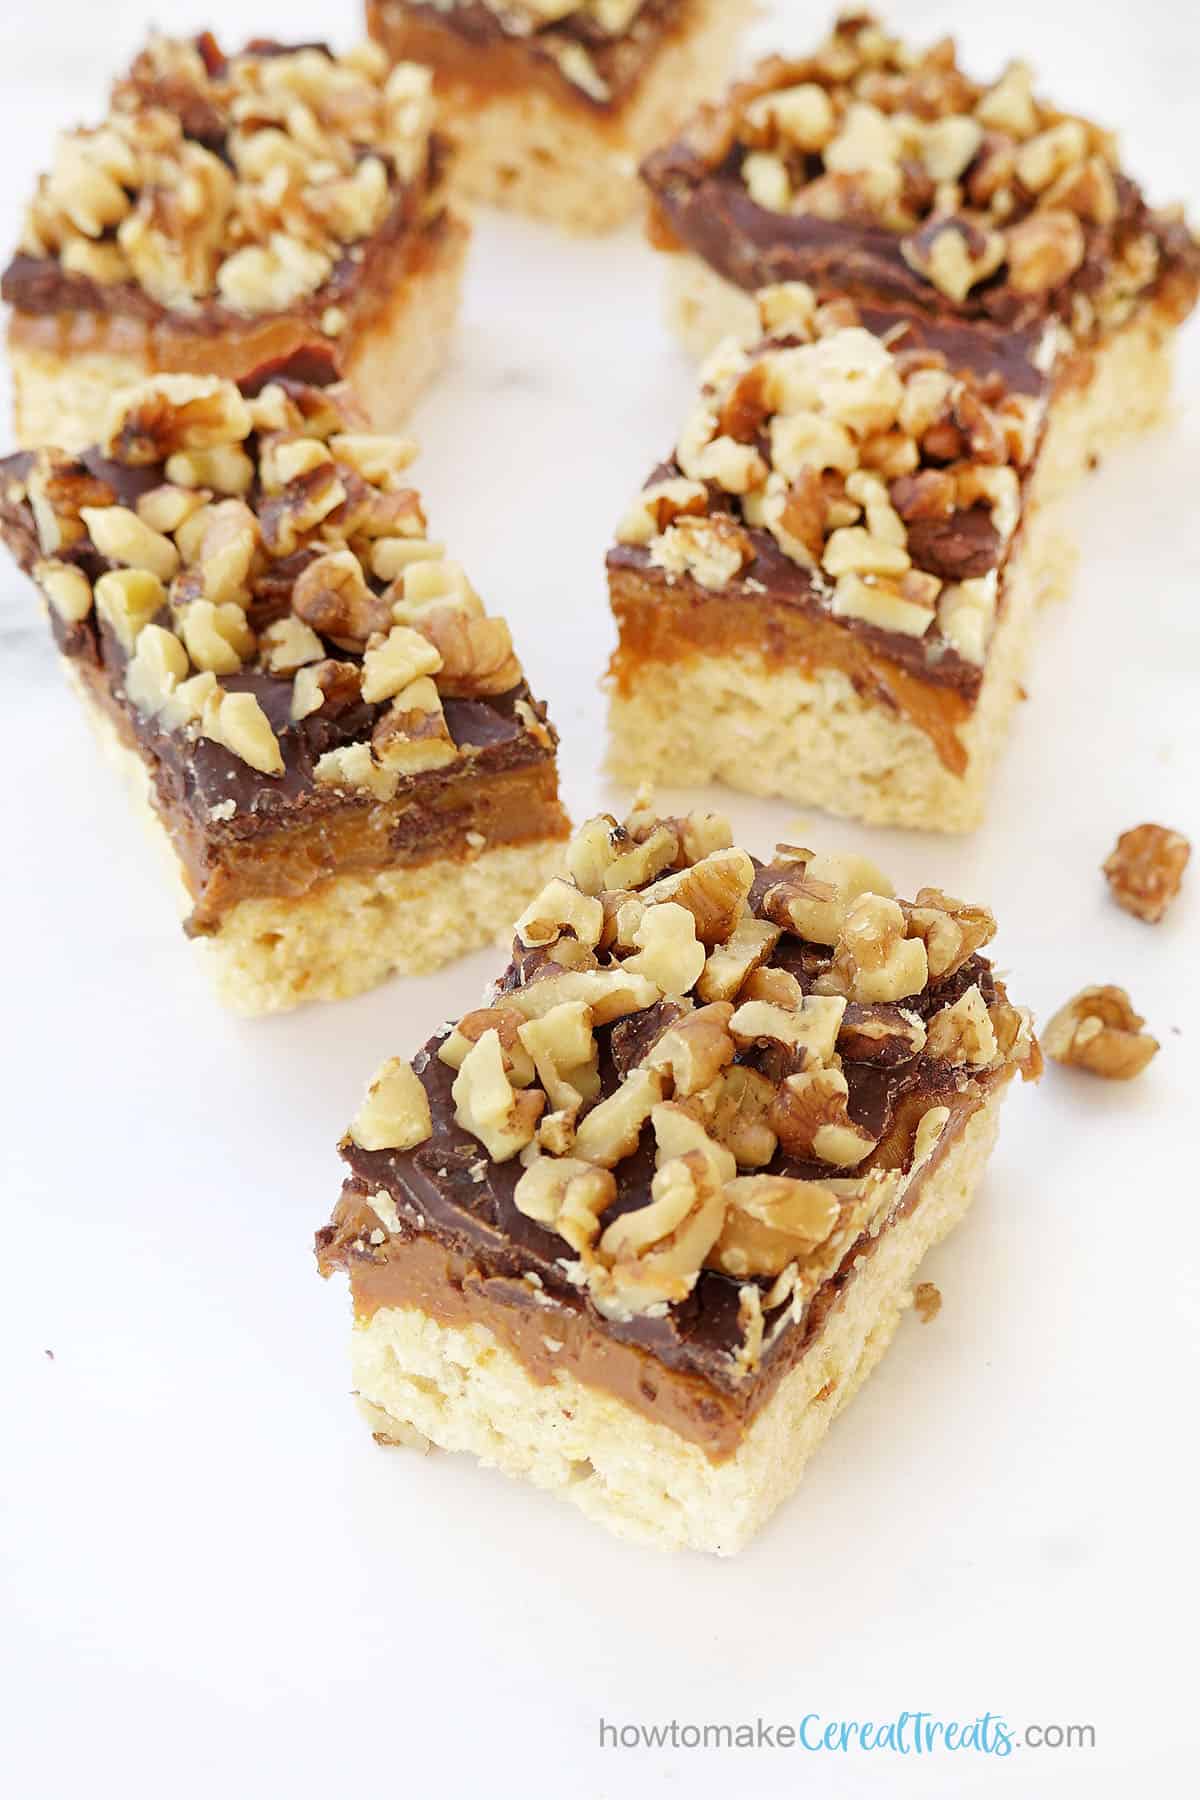 pecans or walnuts with dulce de leche and ganache on rice krispie treats